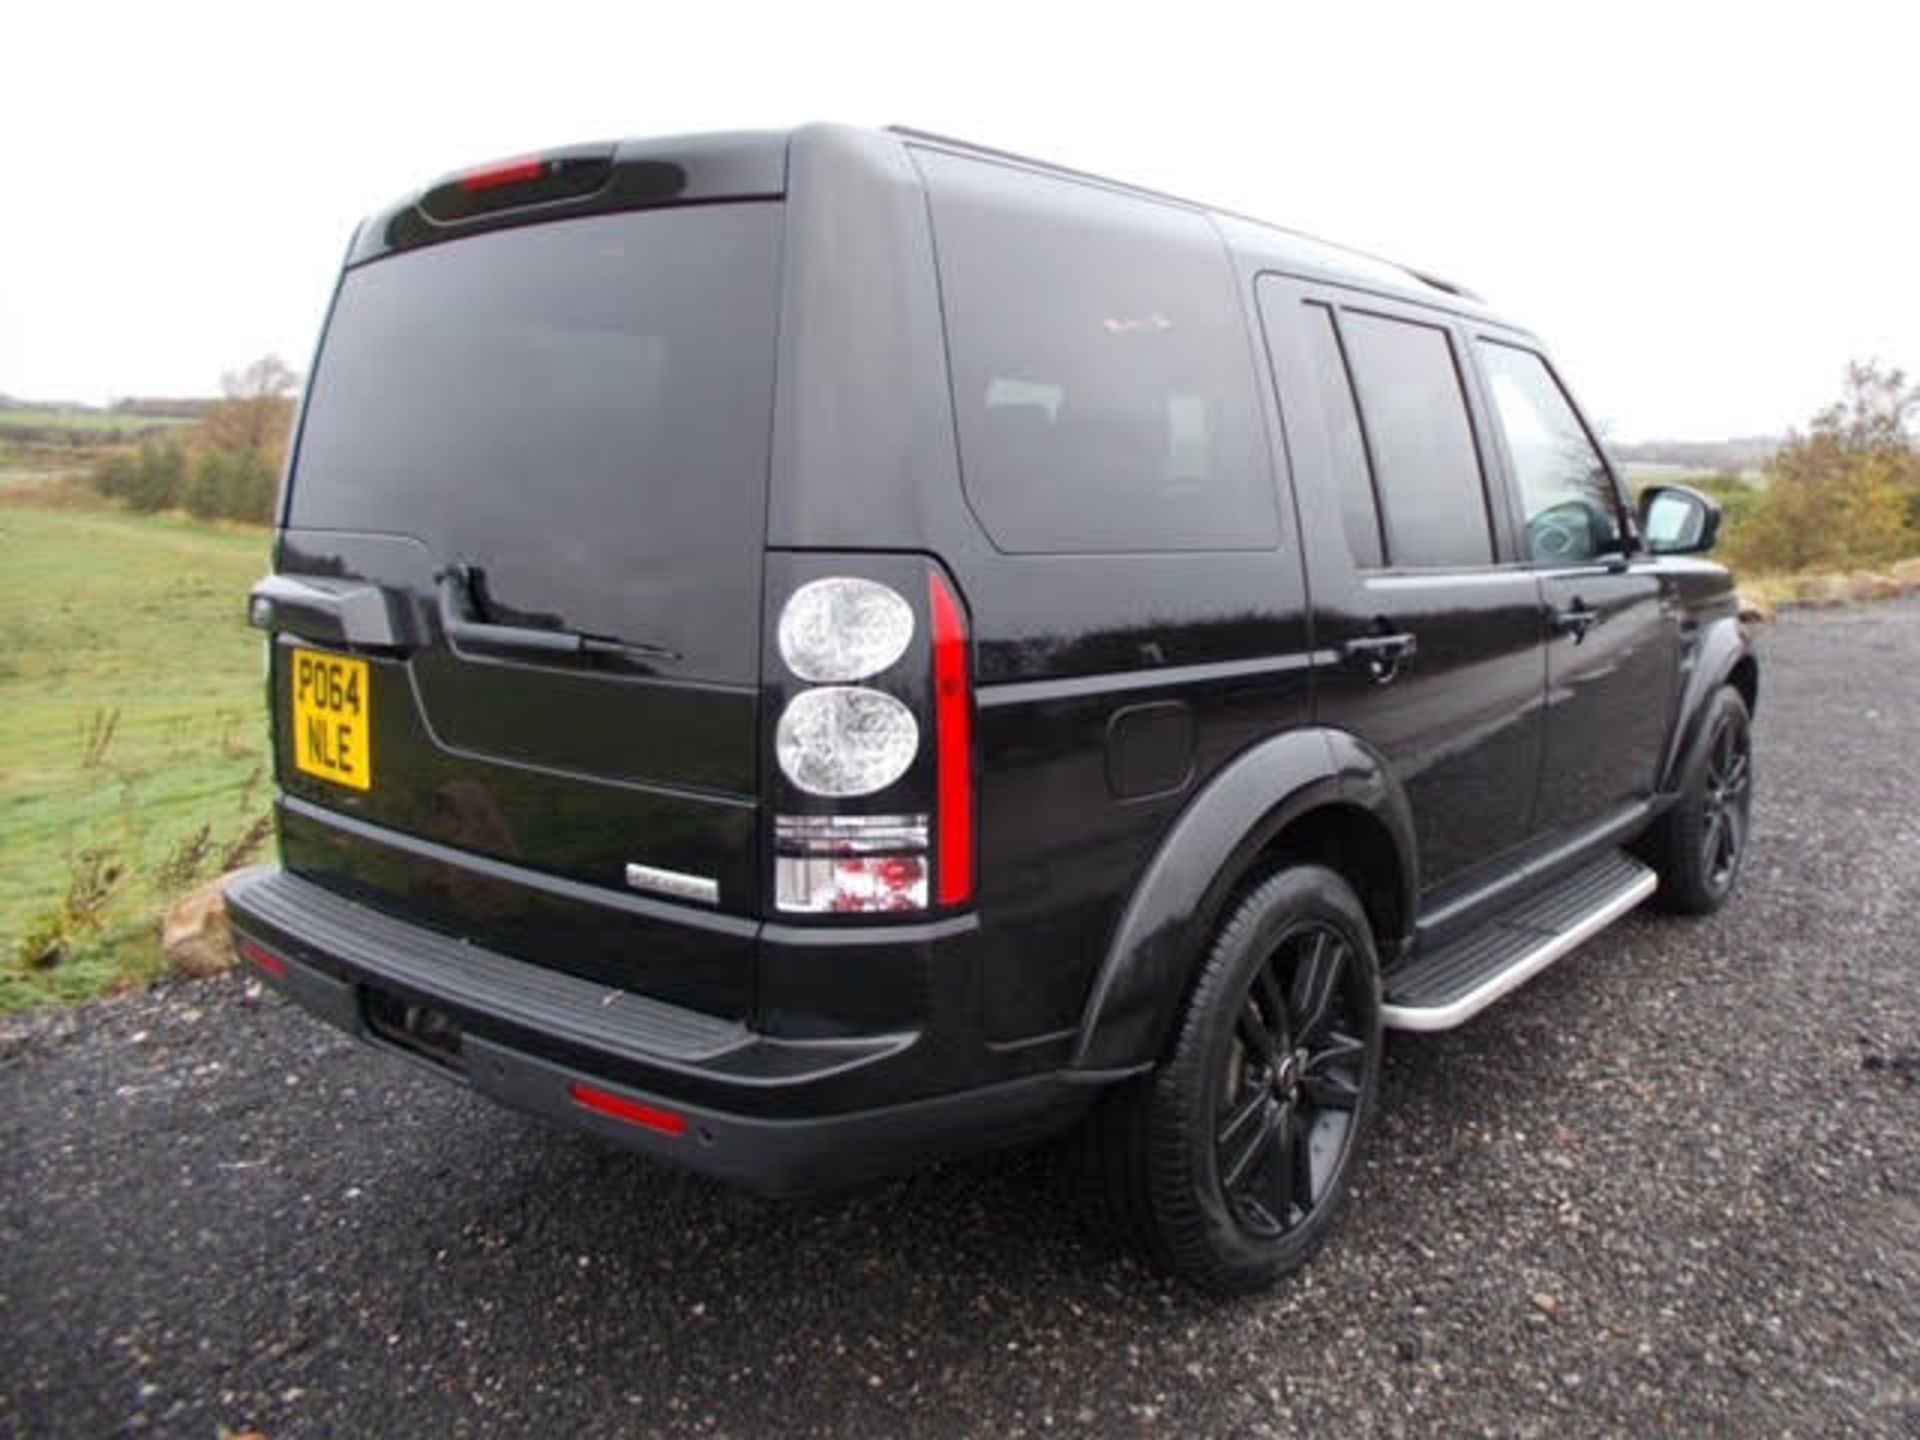 2015 (64) LAND ROVER DISCOVERY 3.0 SCV6 PETROL, AUTO, 7 SEATER *NO VAT* - Image 5 of 24